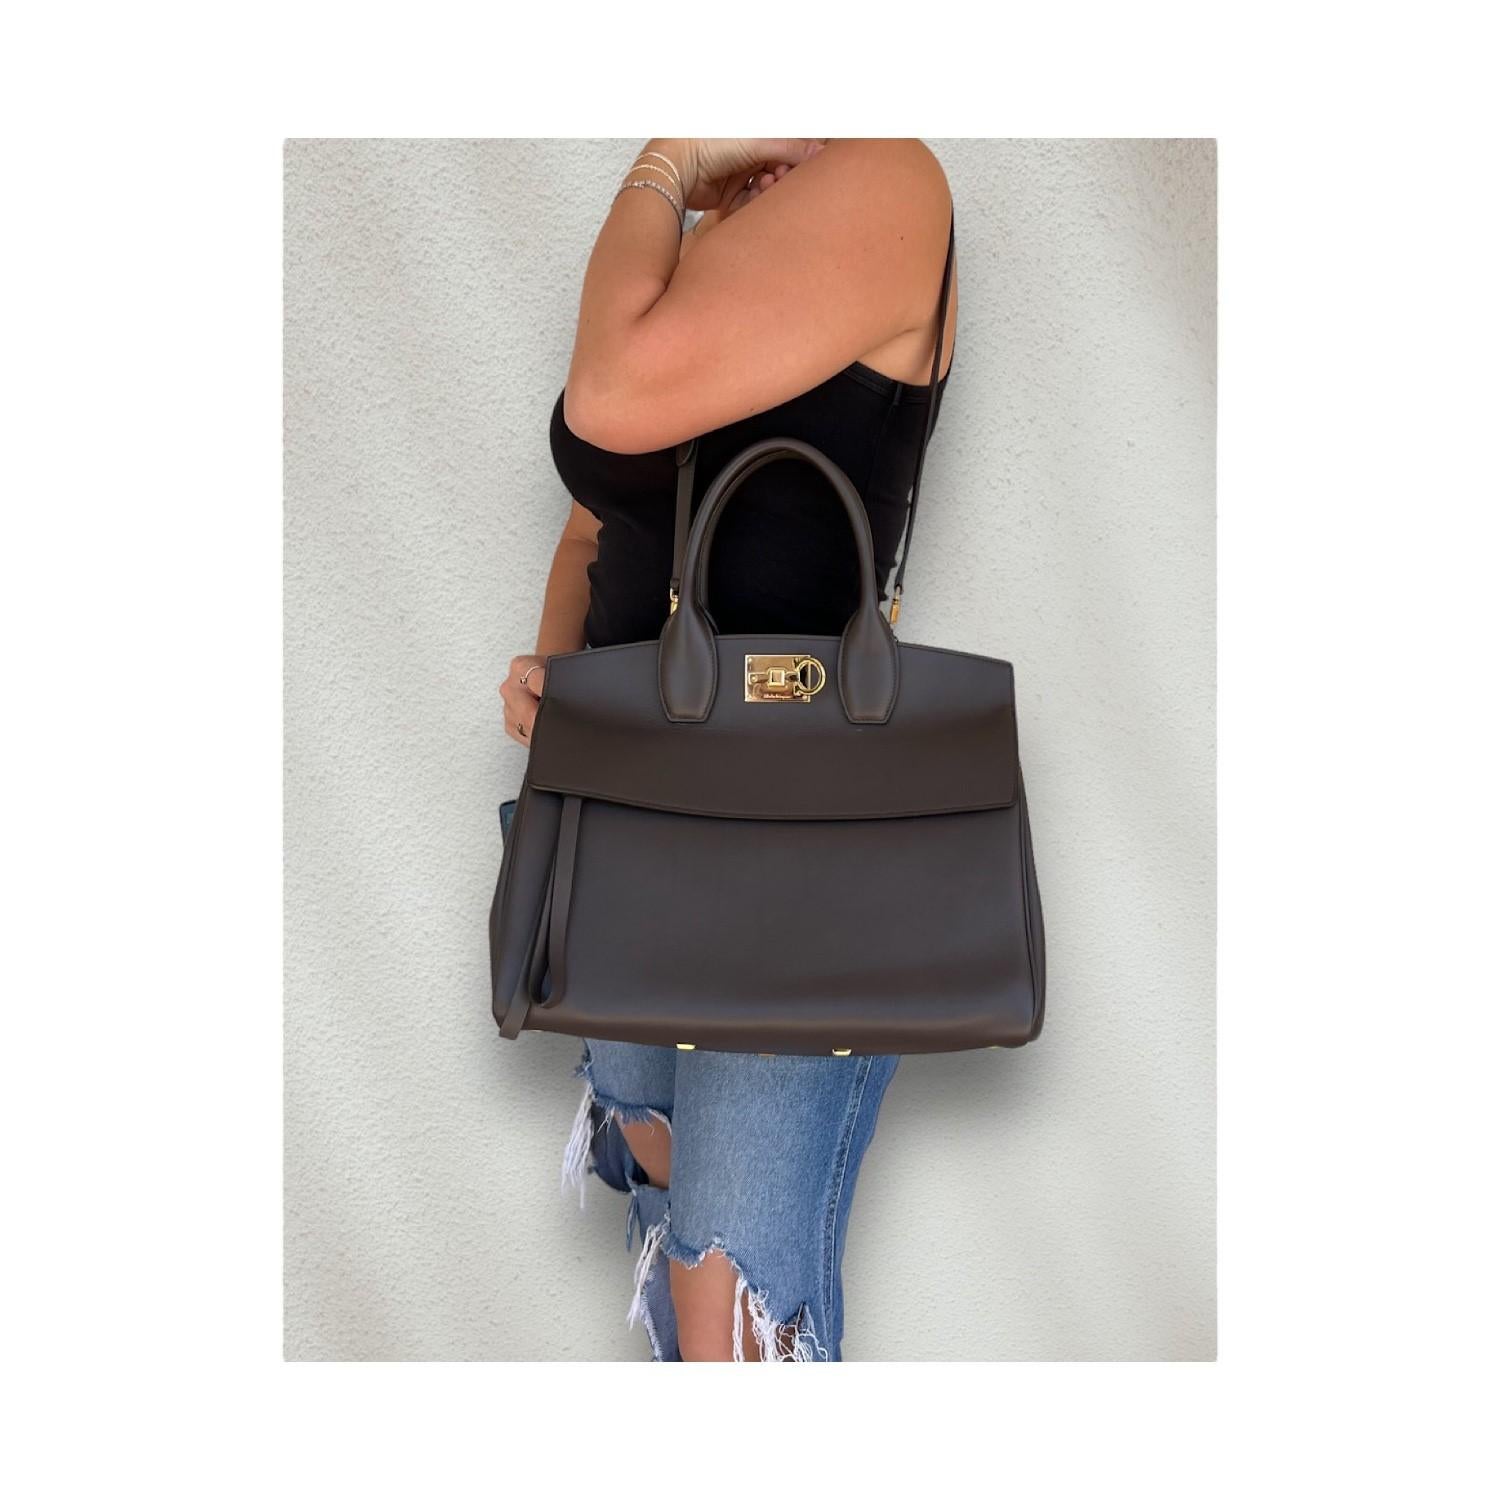 This Salvatore Ferragamo Studio Bag was made in Italy and it is crafted of grey natural-grain calfskin leather and gold-tone hardware features. It has a frontal zipper pocket and it also has an adjustable and removeable shoulder strap. It features a